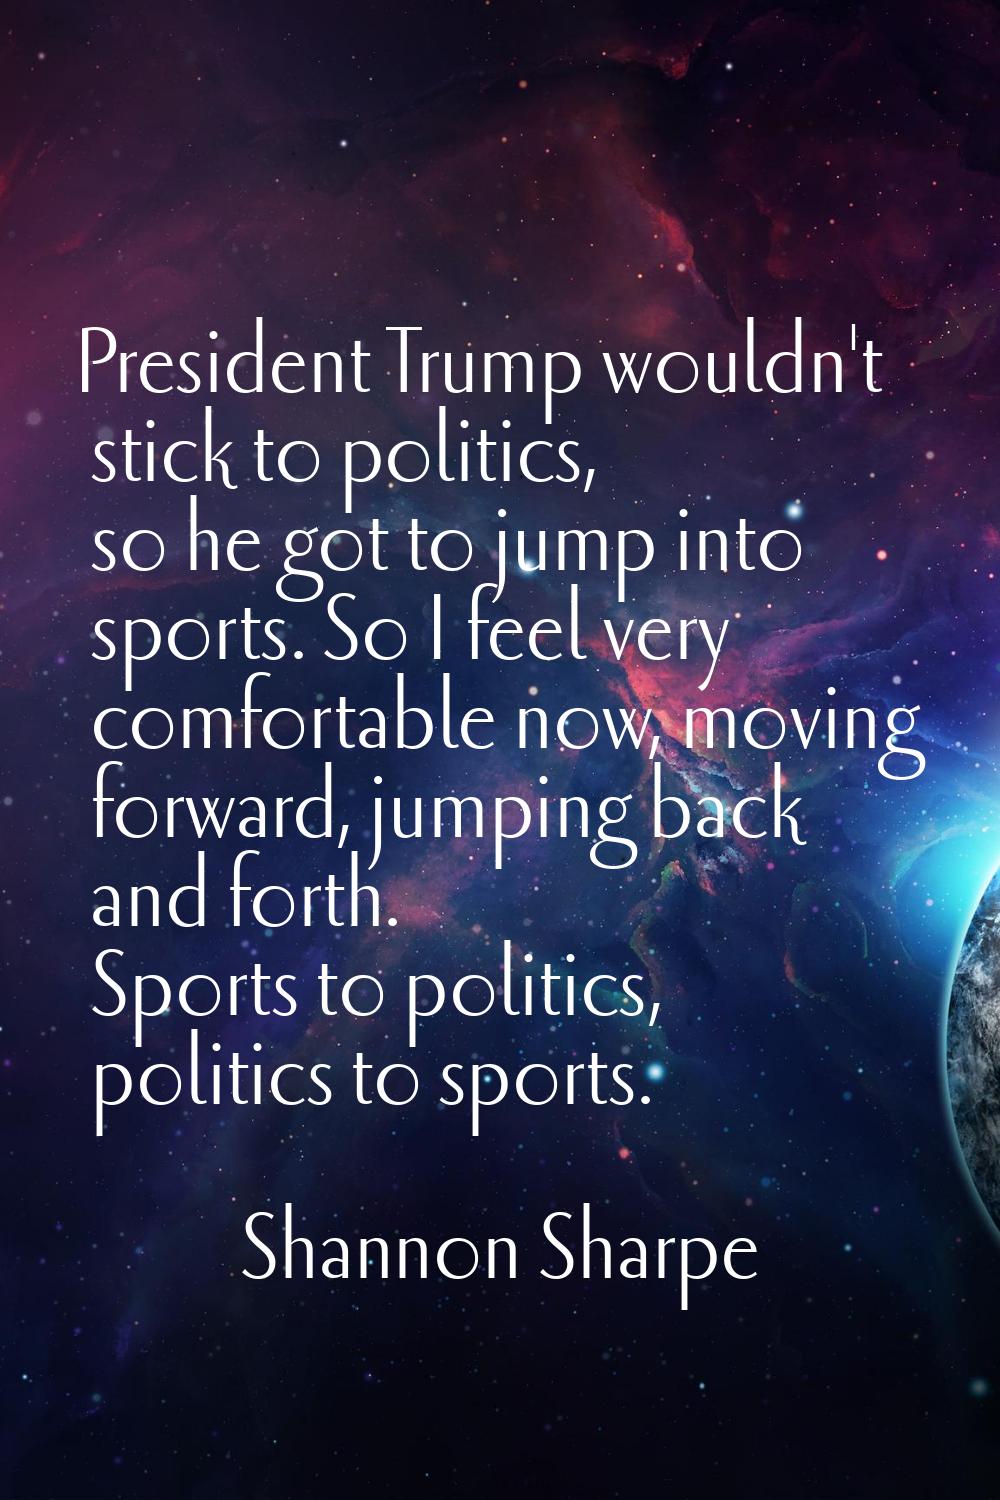 President Trump wouldn't stick to politics, so he got to jump into sports. So I feel very comfortab